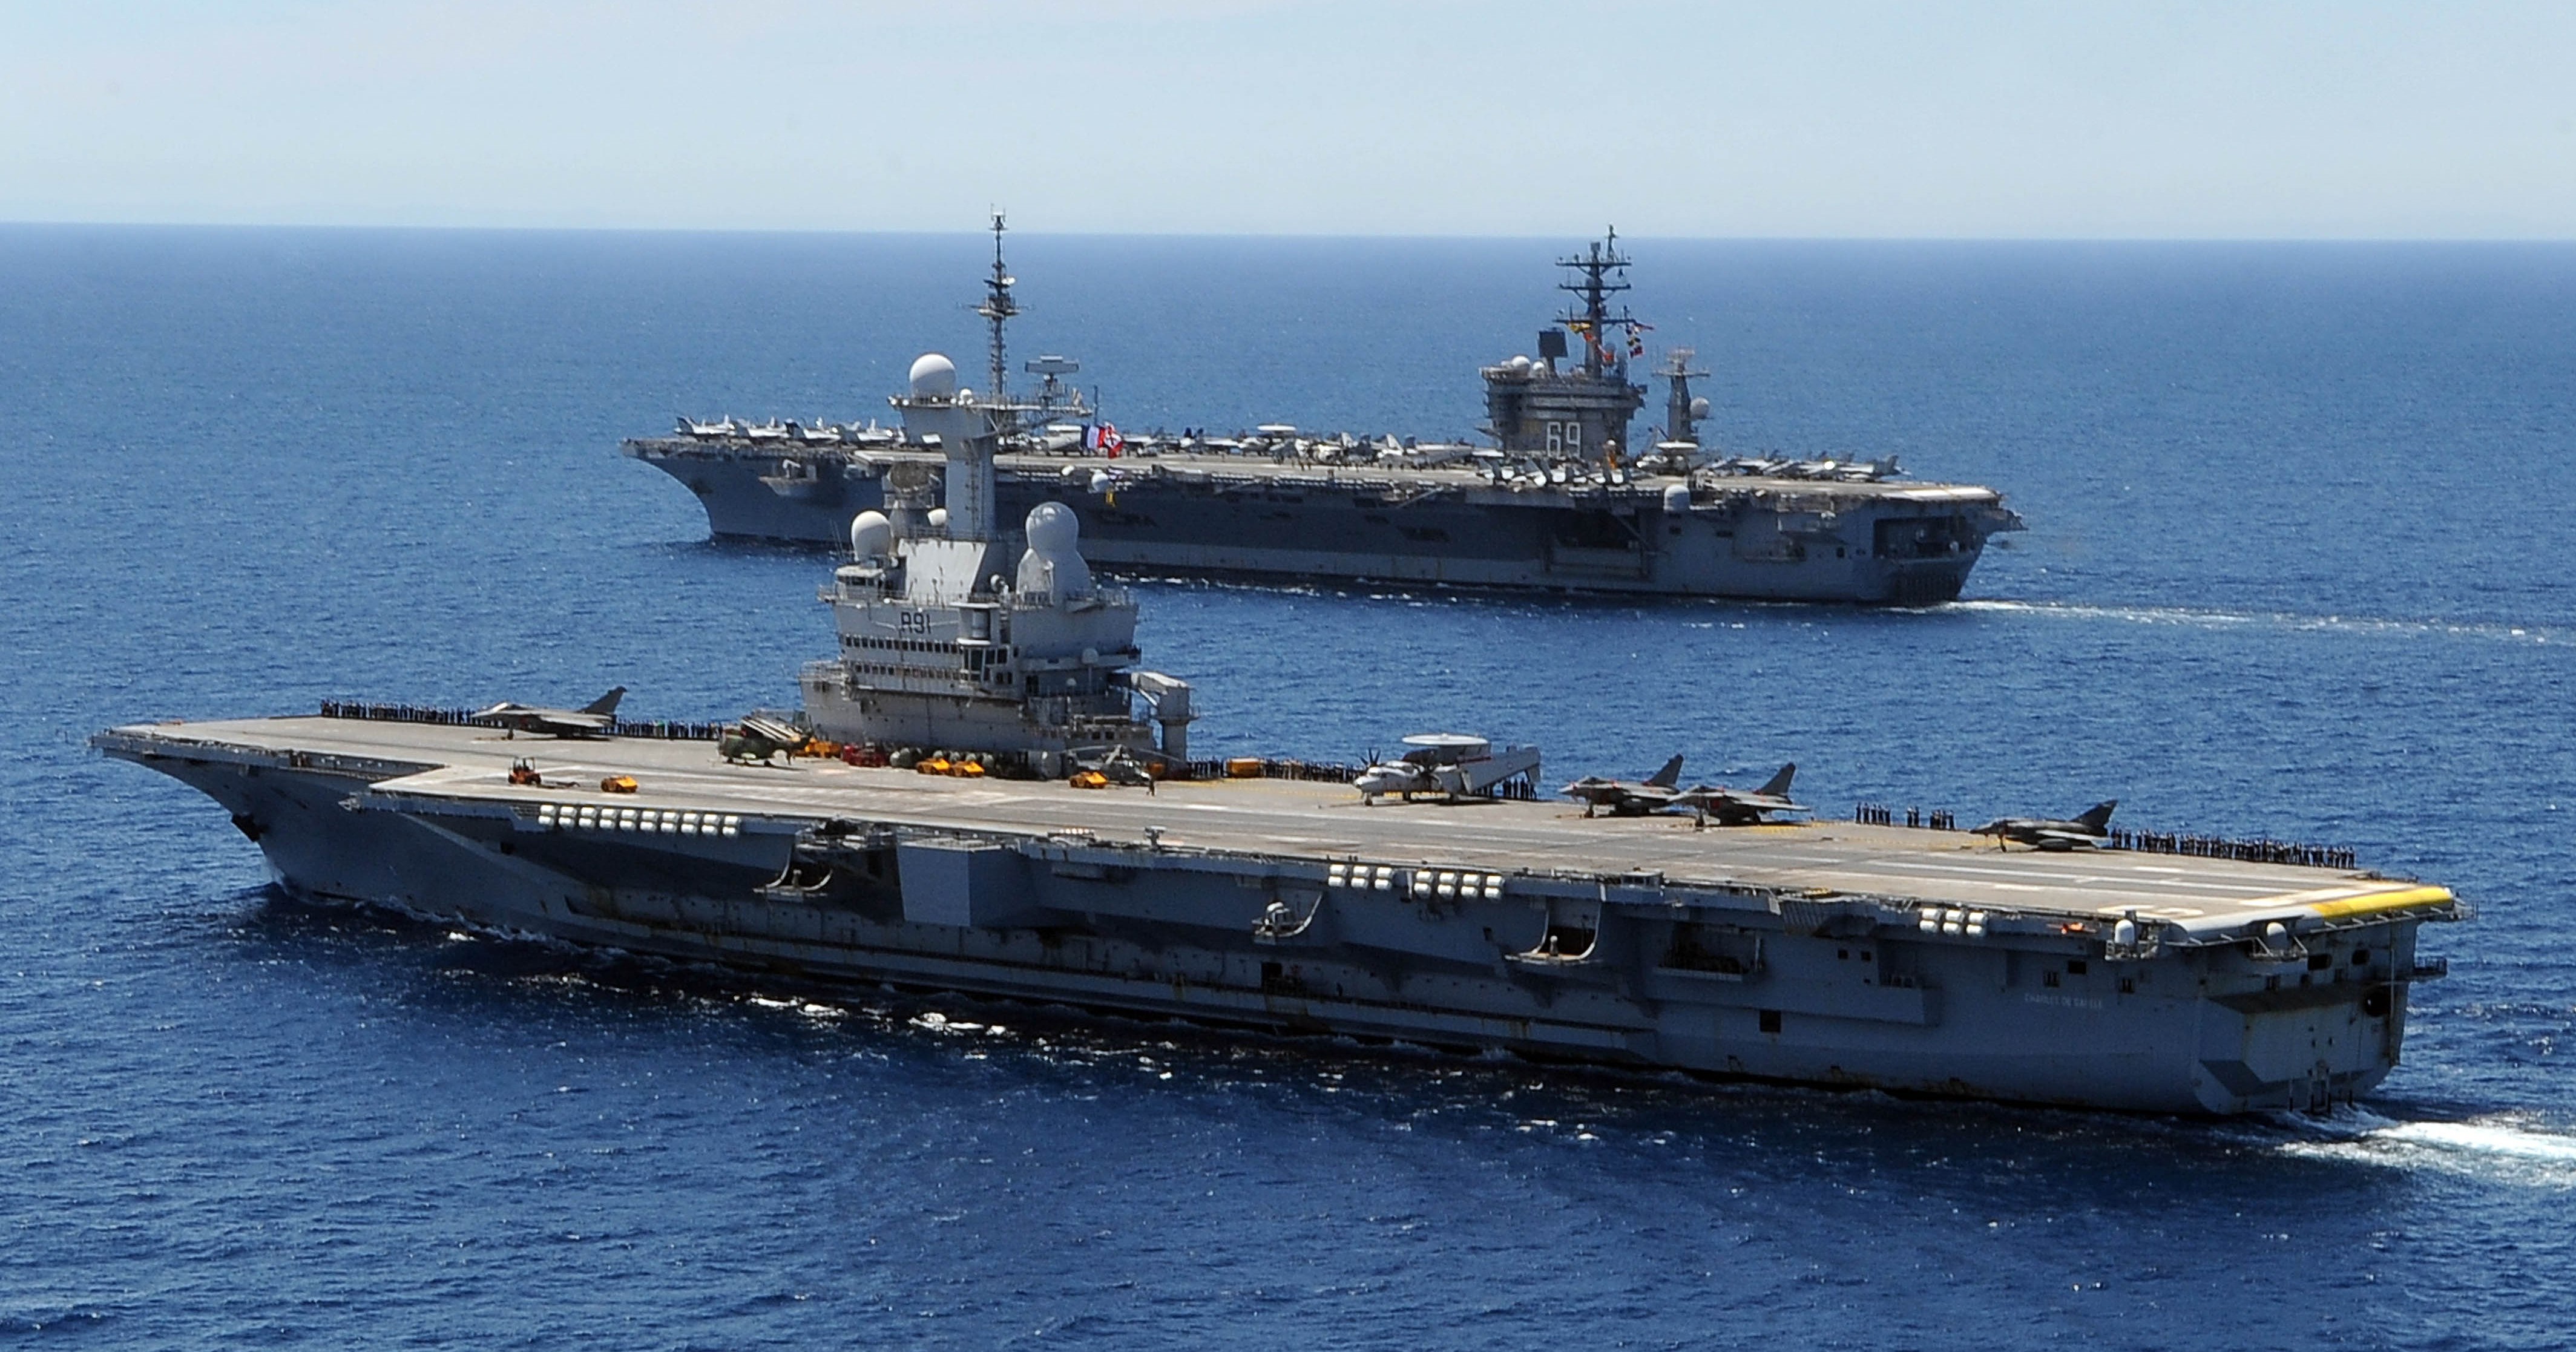 This is the tragic history of the flying aircraft carrier